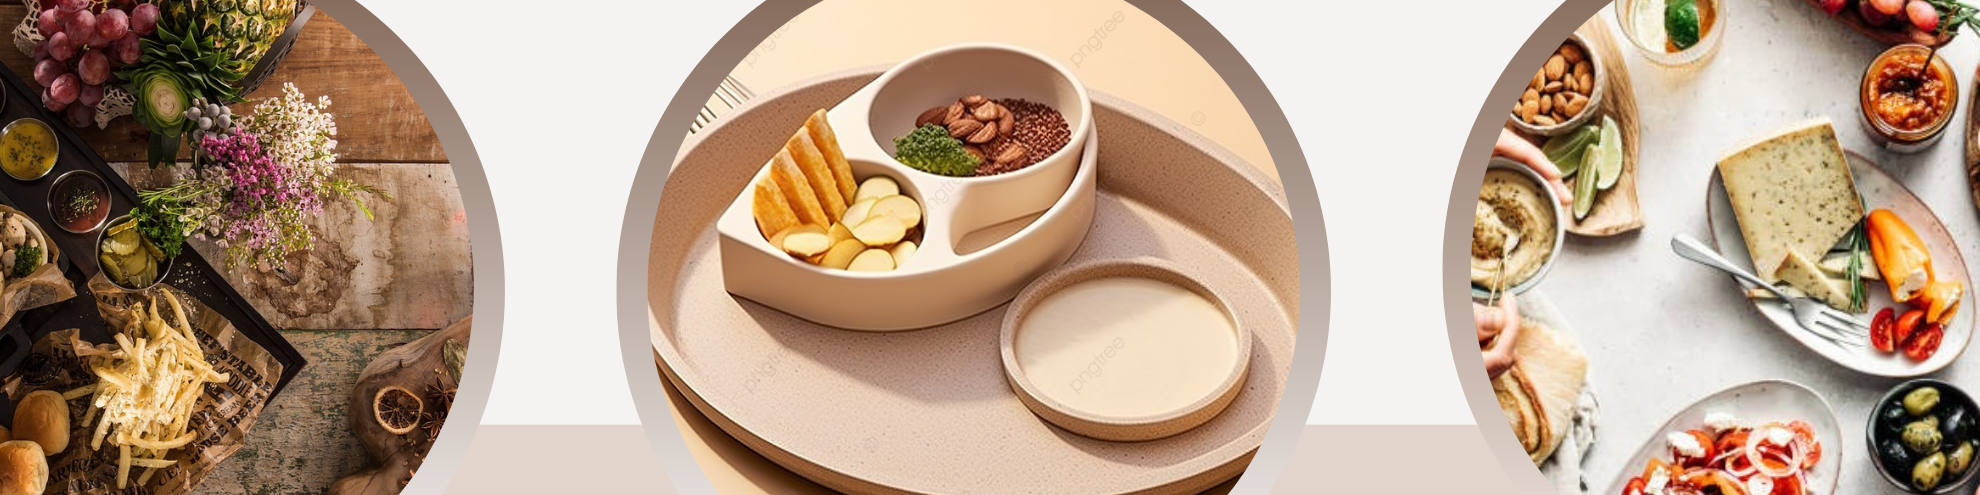 HY decoration Trays & Platters